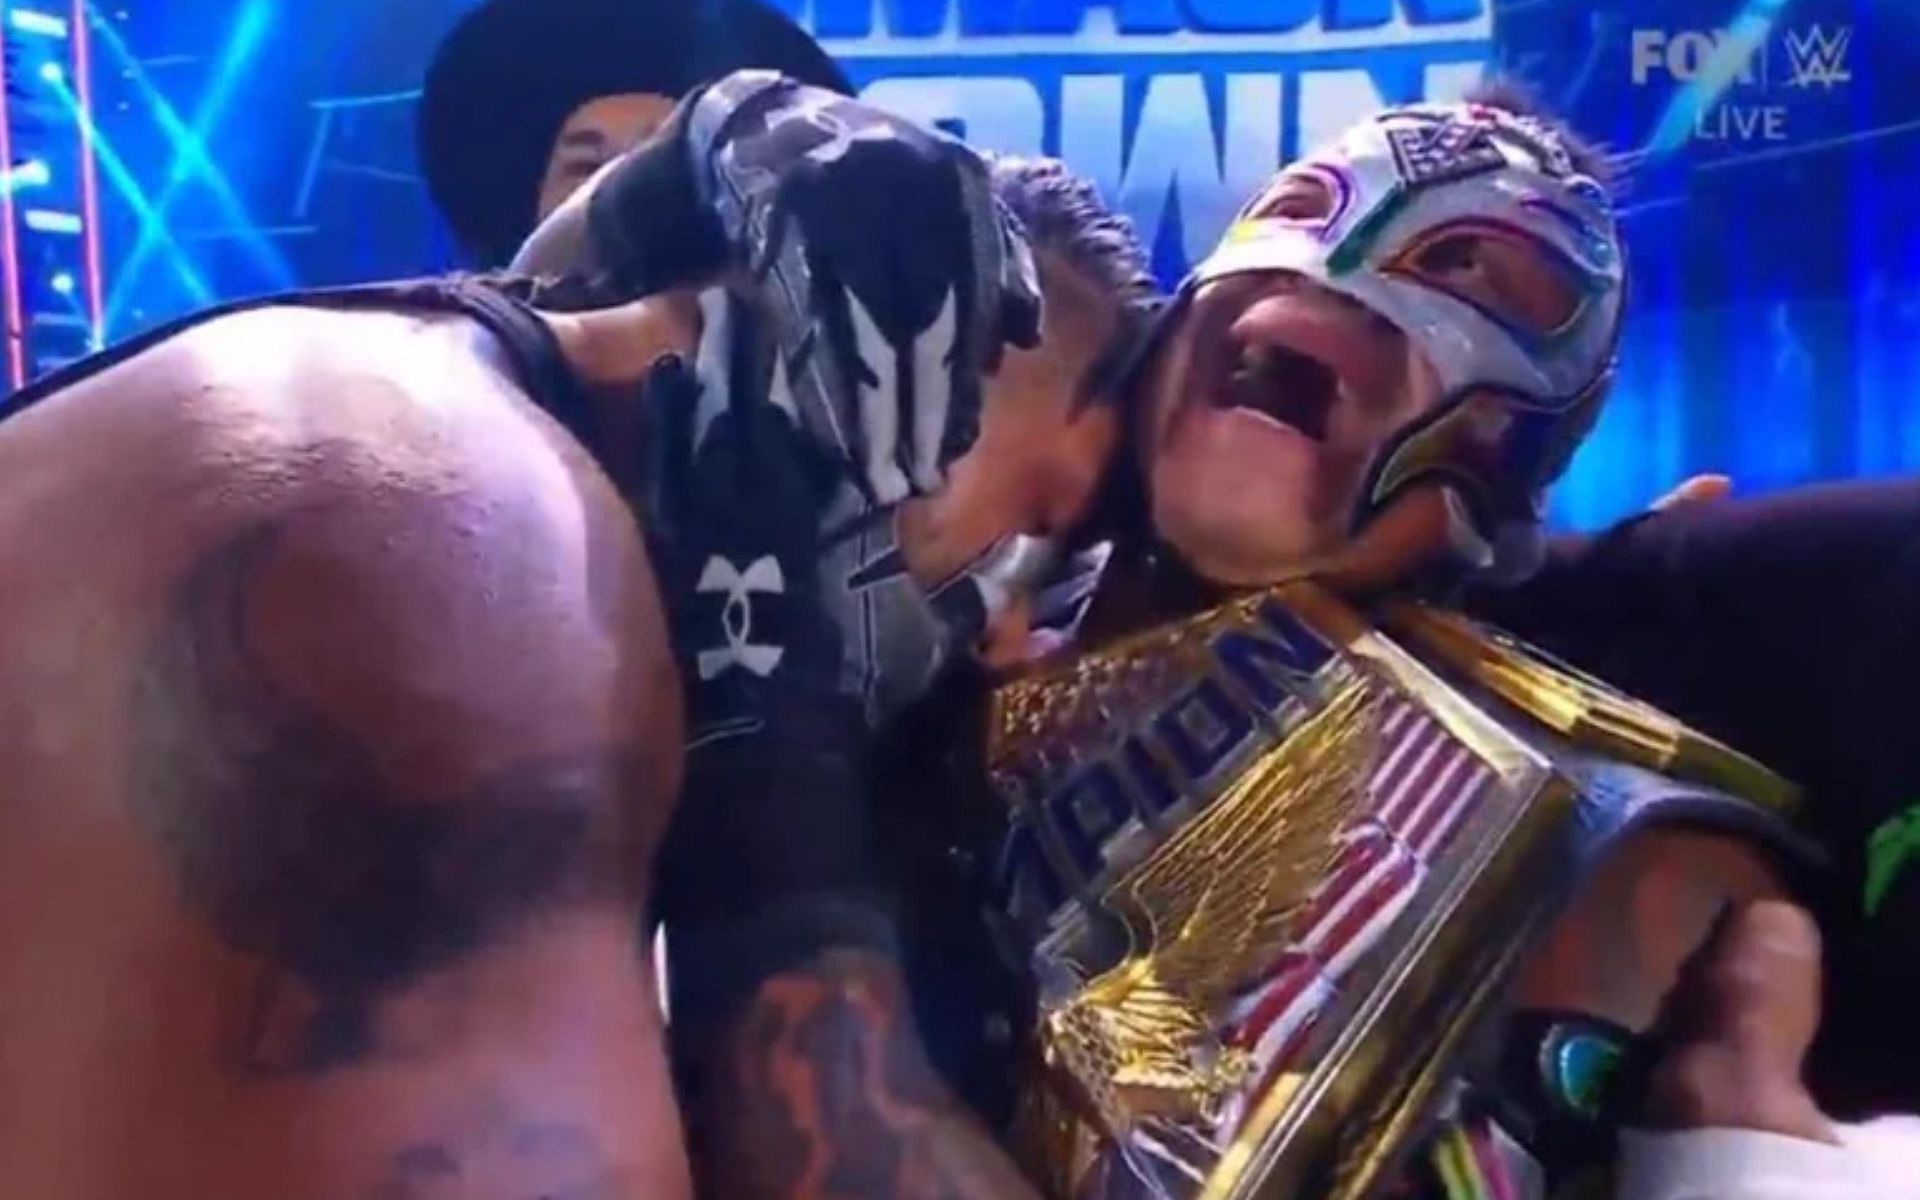 The legendary luchador is now a 3-time US Champion!